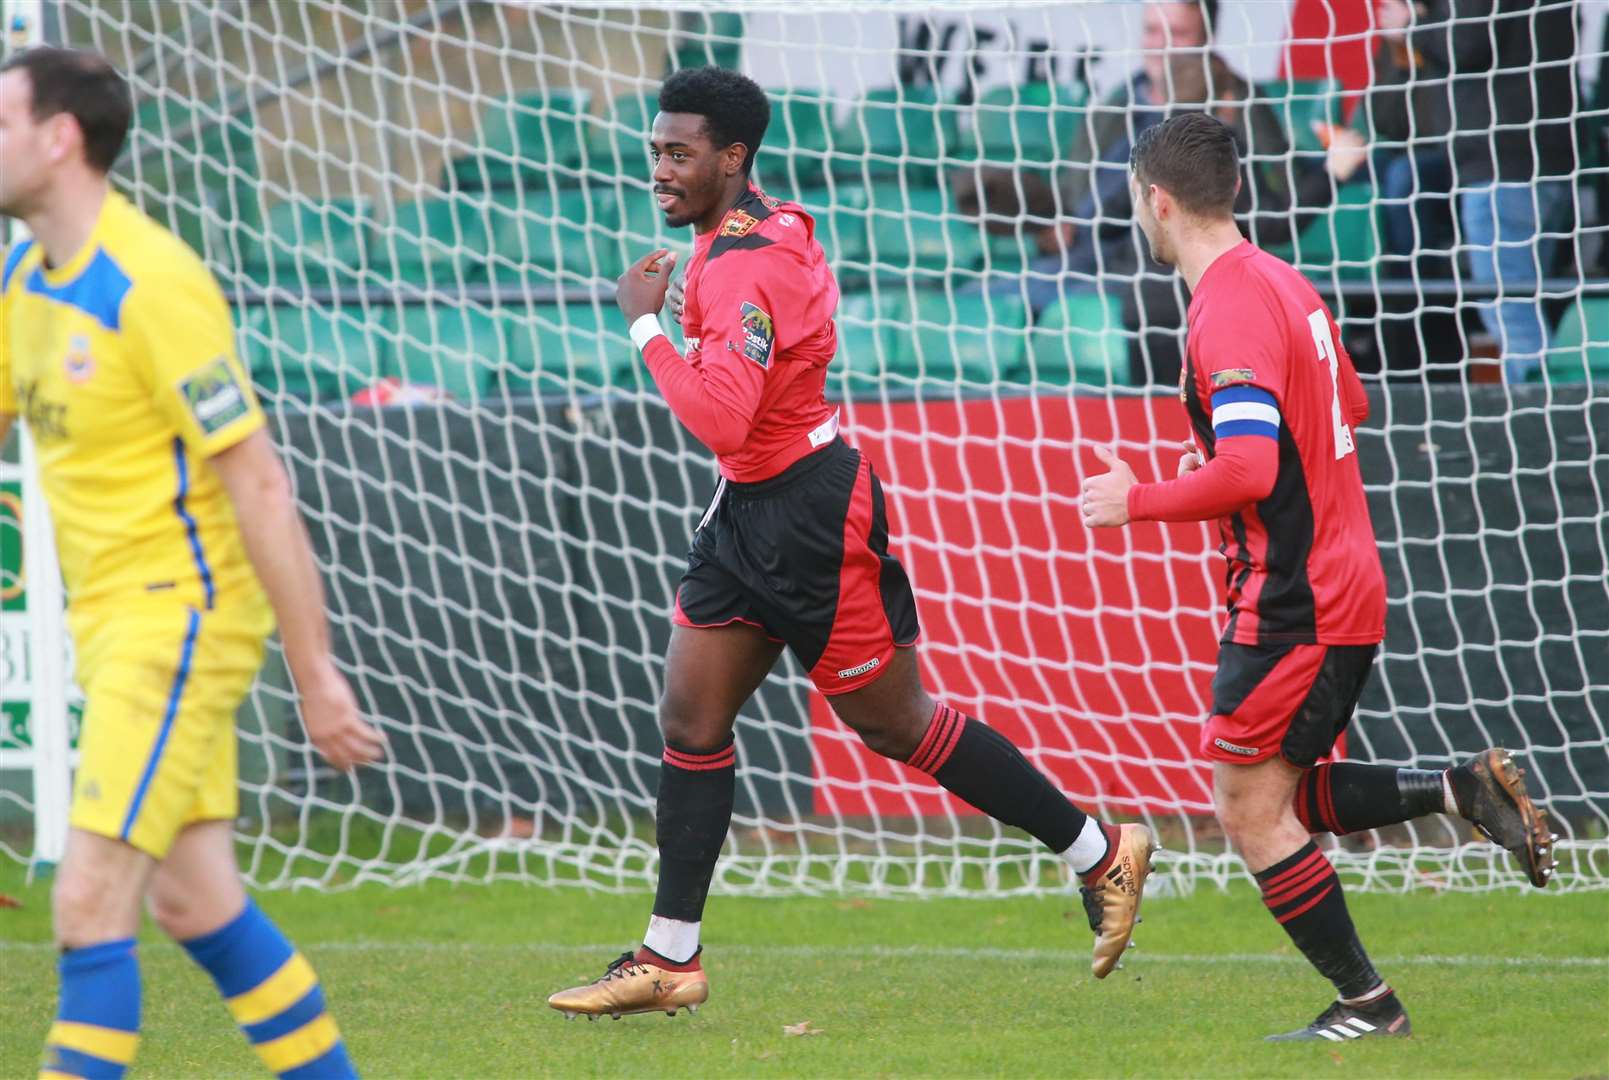 Ira Jackson celebrates a goal for his previous club Sittingbourne Picture by: John Westhrop